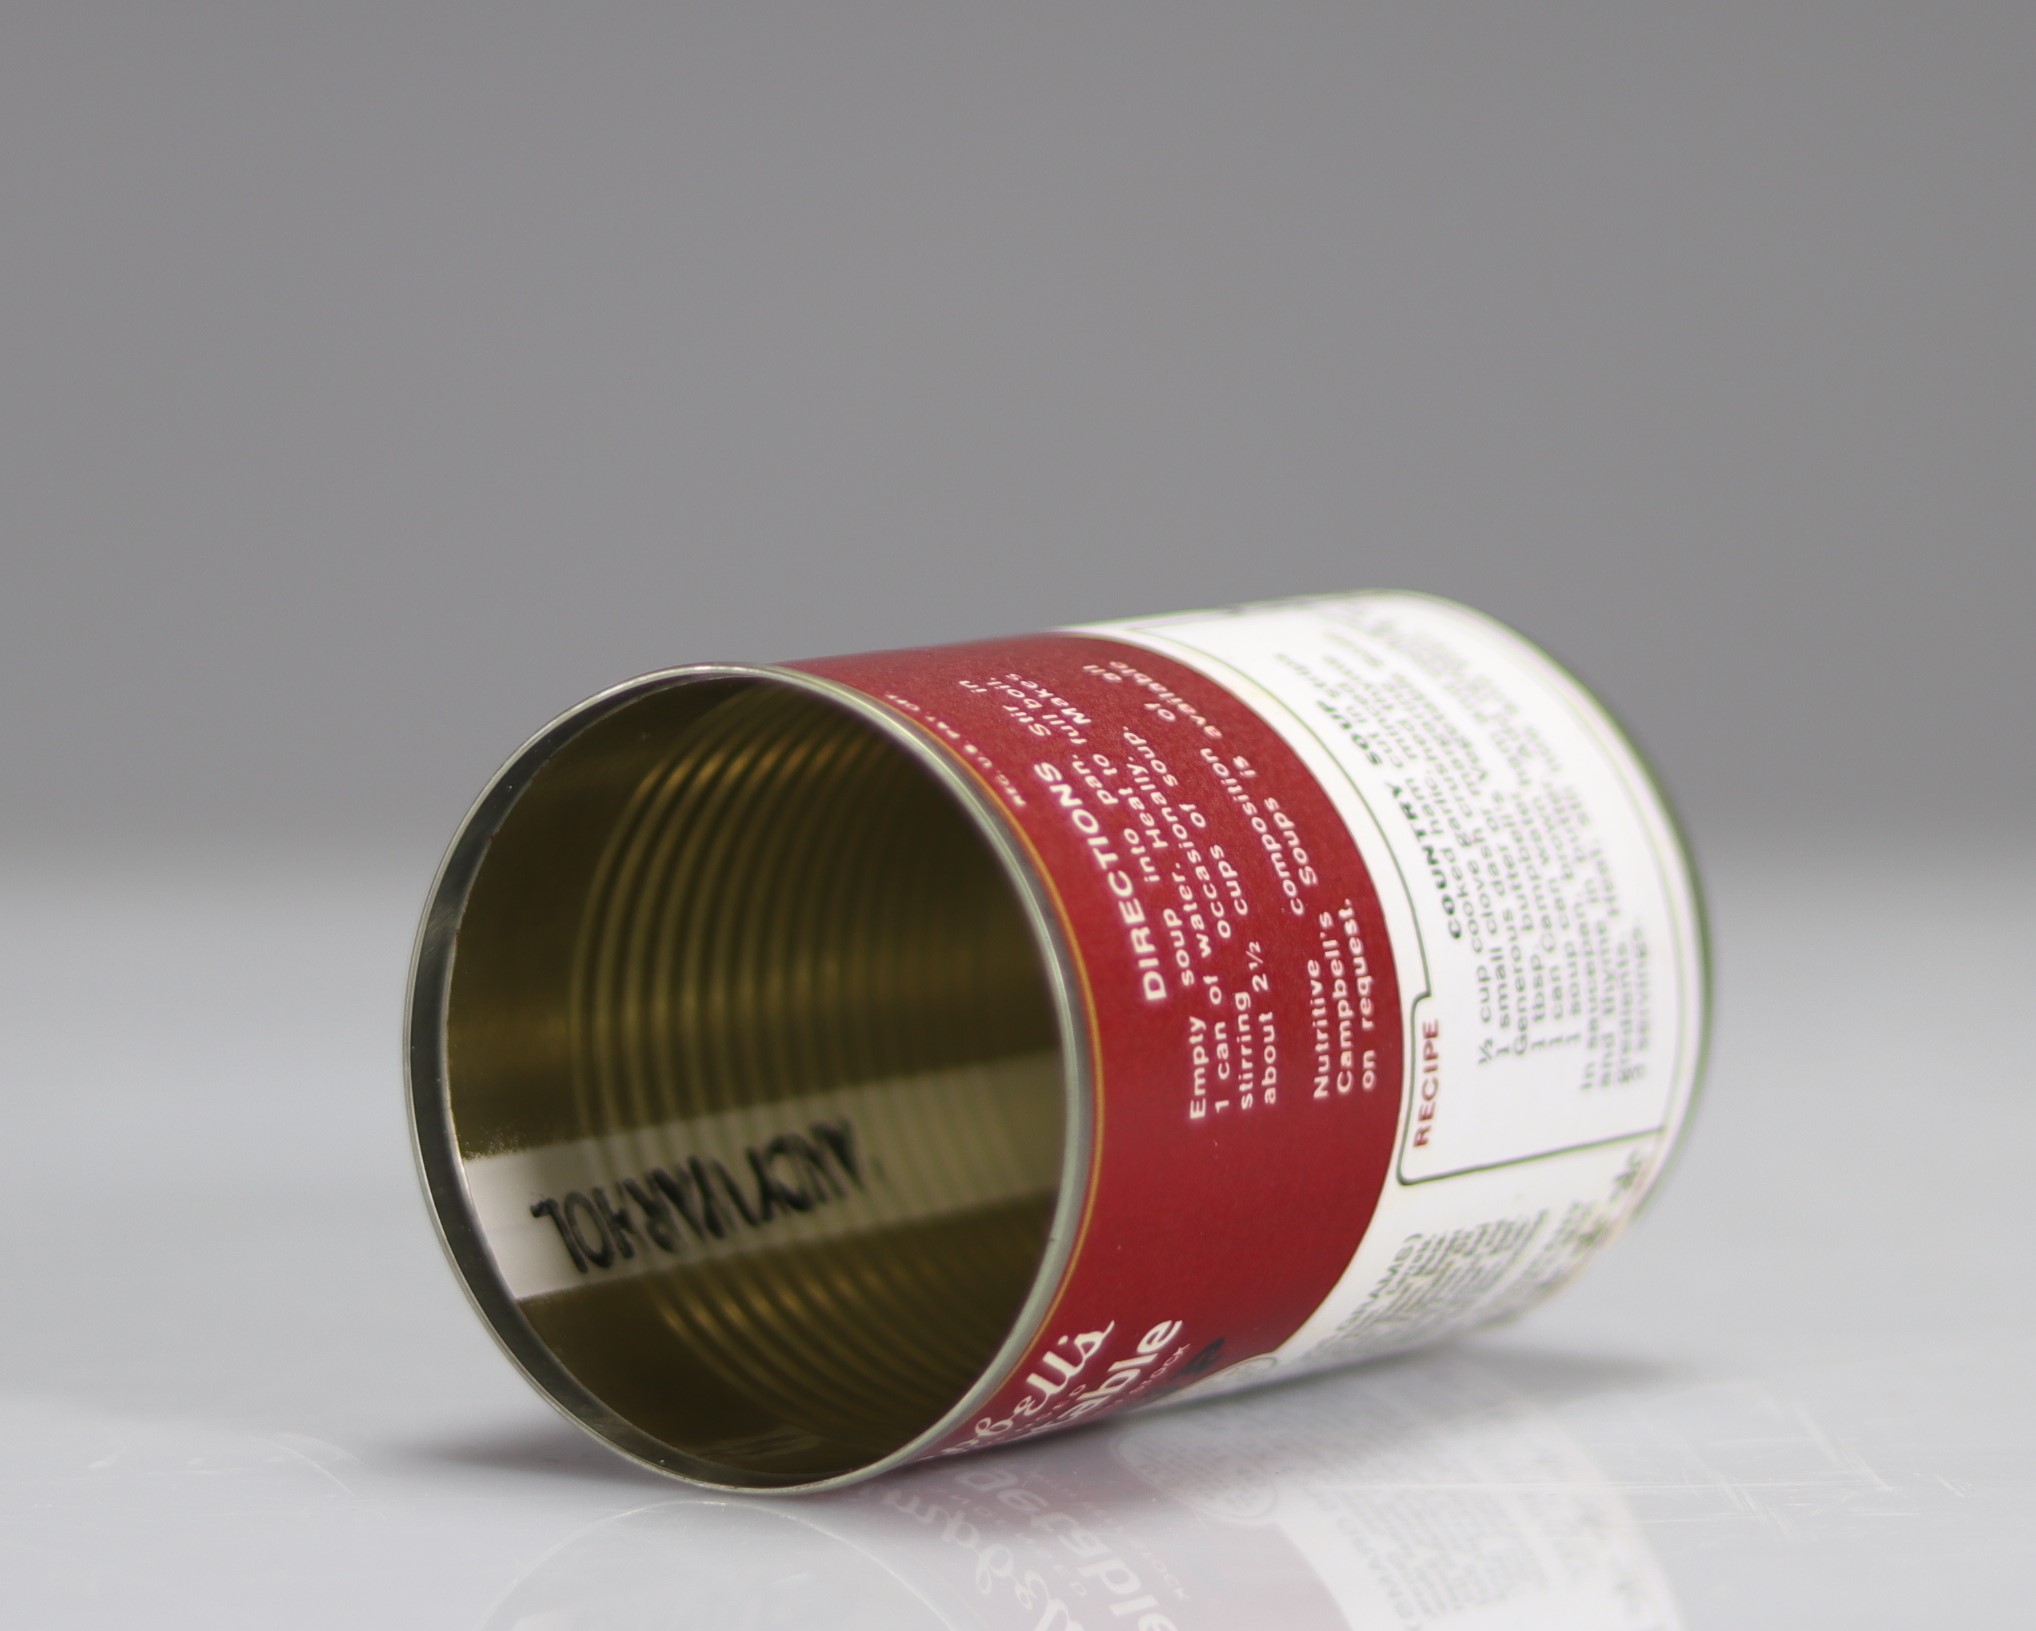 Andy Warhol (after). Campbell's Soup "Vegetable". Metal tin can. - Image 4 of 4